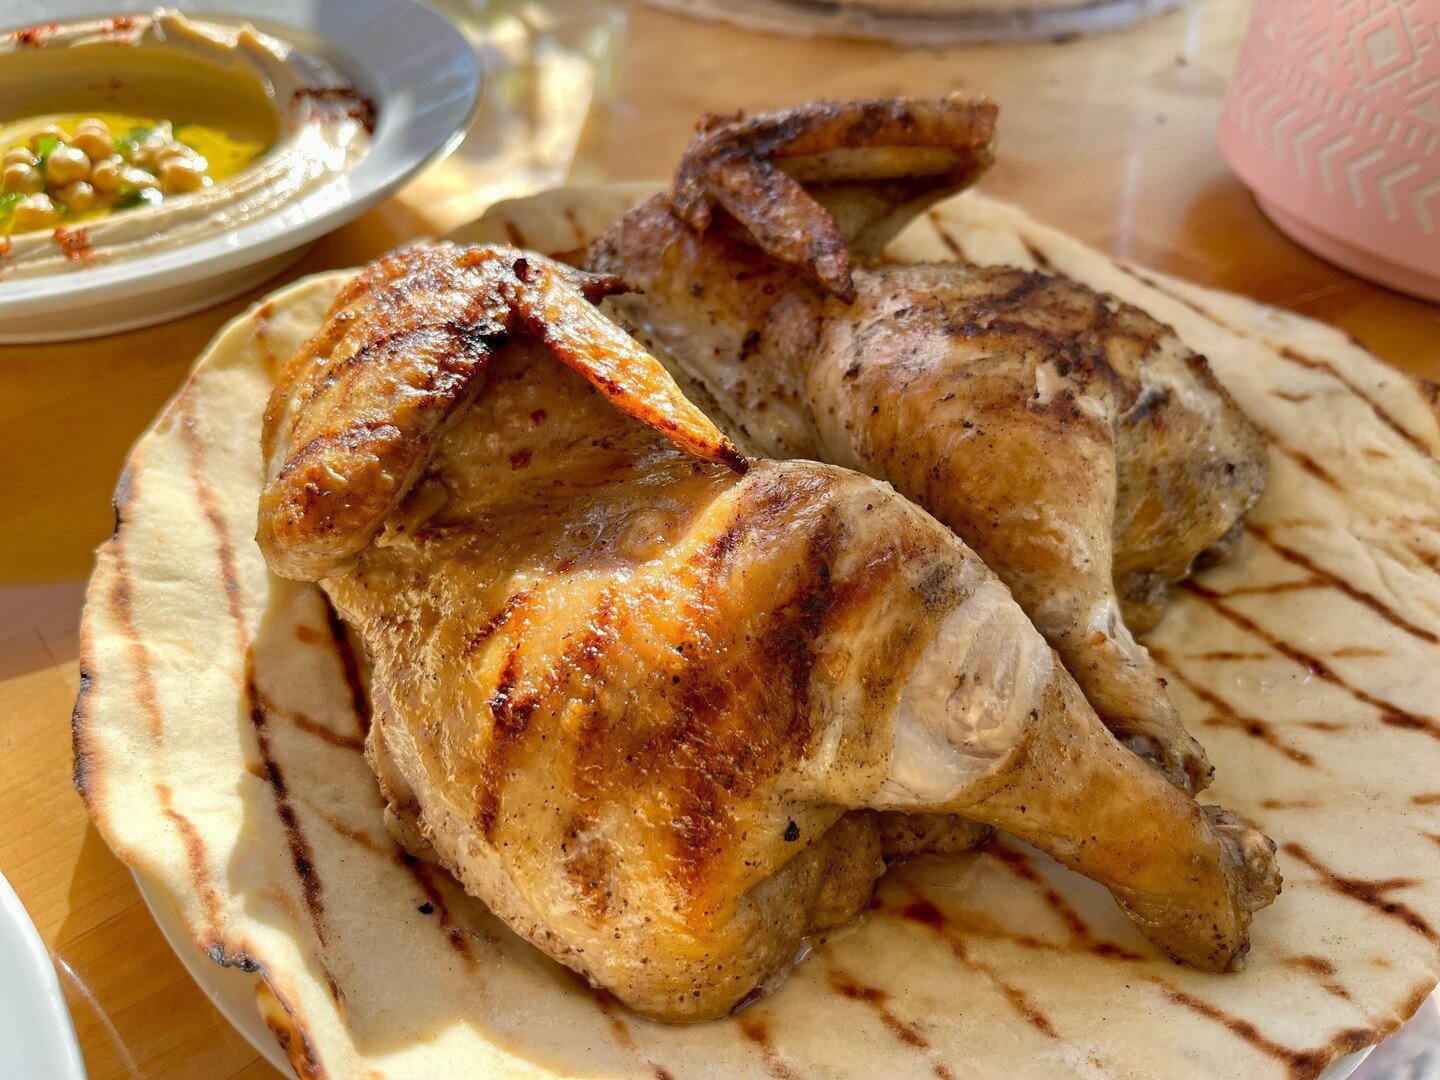 Lemon chicken appreciation post! It tastes even better than it looks, we promise. This juicy, perfectly seasoned chicken (along with the rest of our Lebanese lemon chicken meal) is the ultimate comfort food on these freezing fall days.